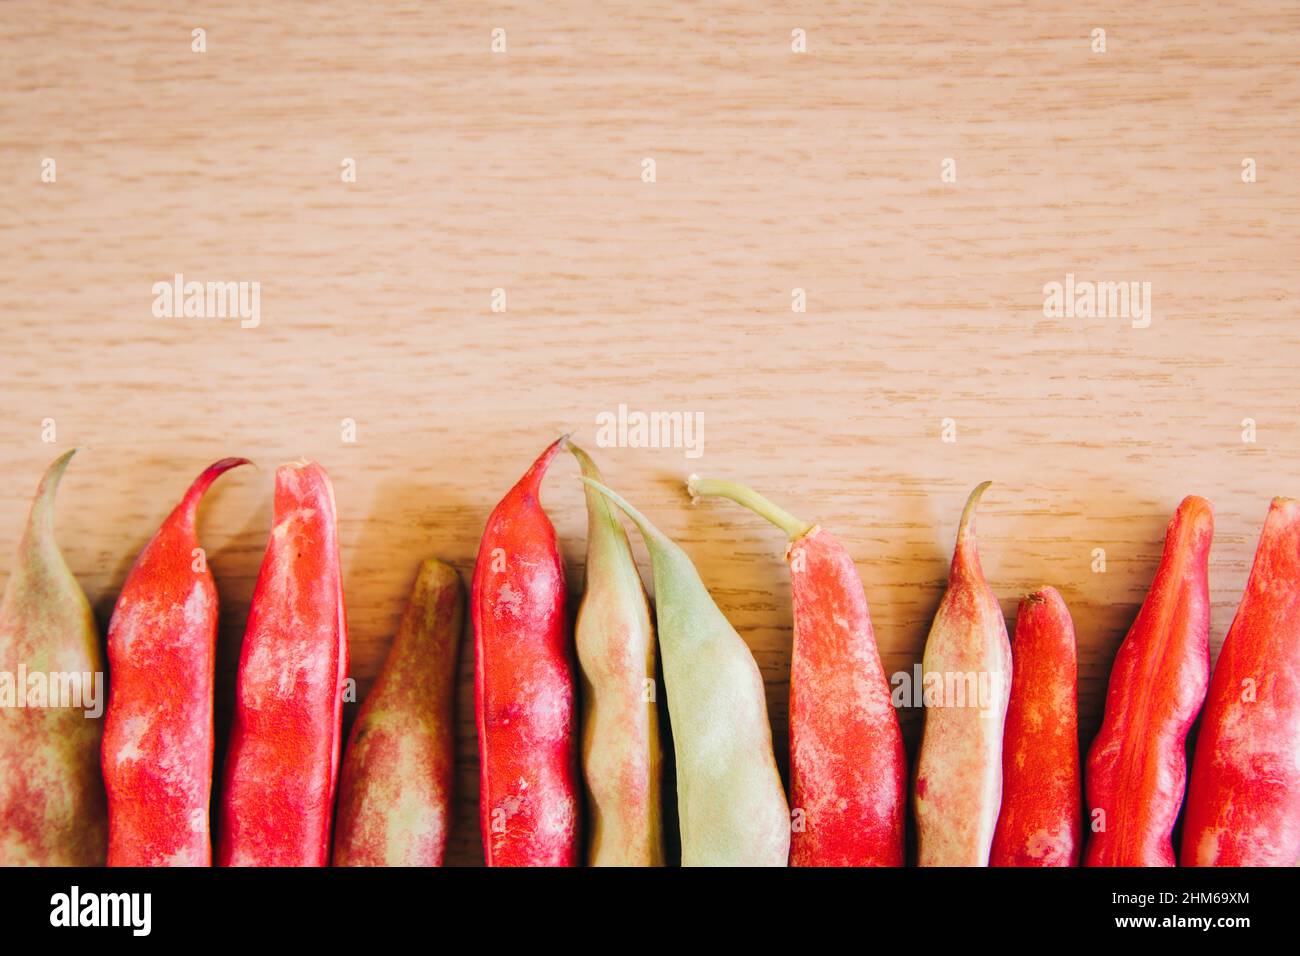 Row of red and green shell beans over a wooden table. Healthy food and organic concept. Stock Photo